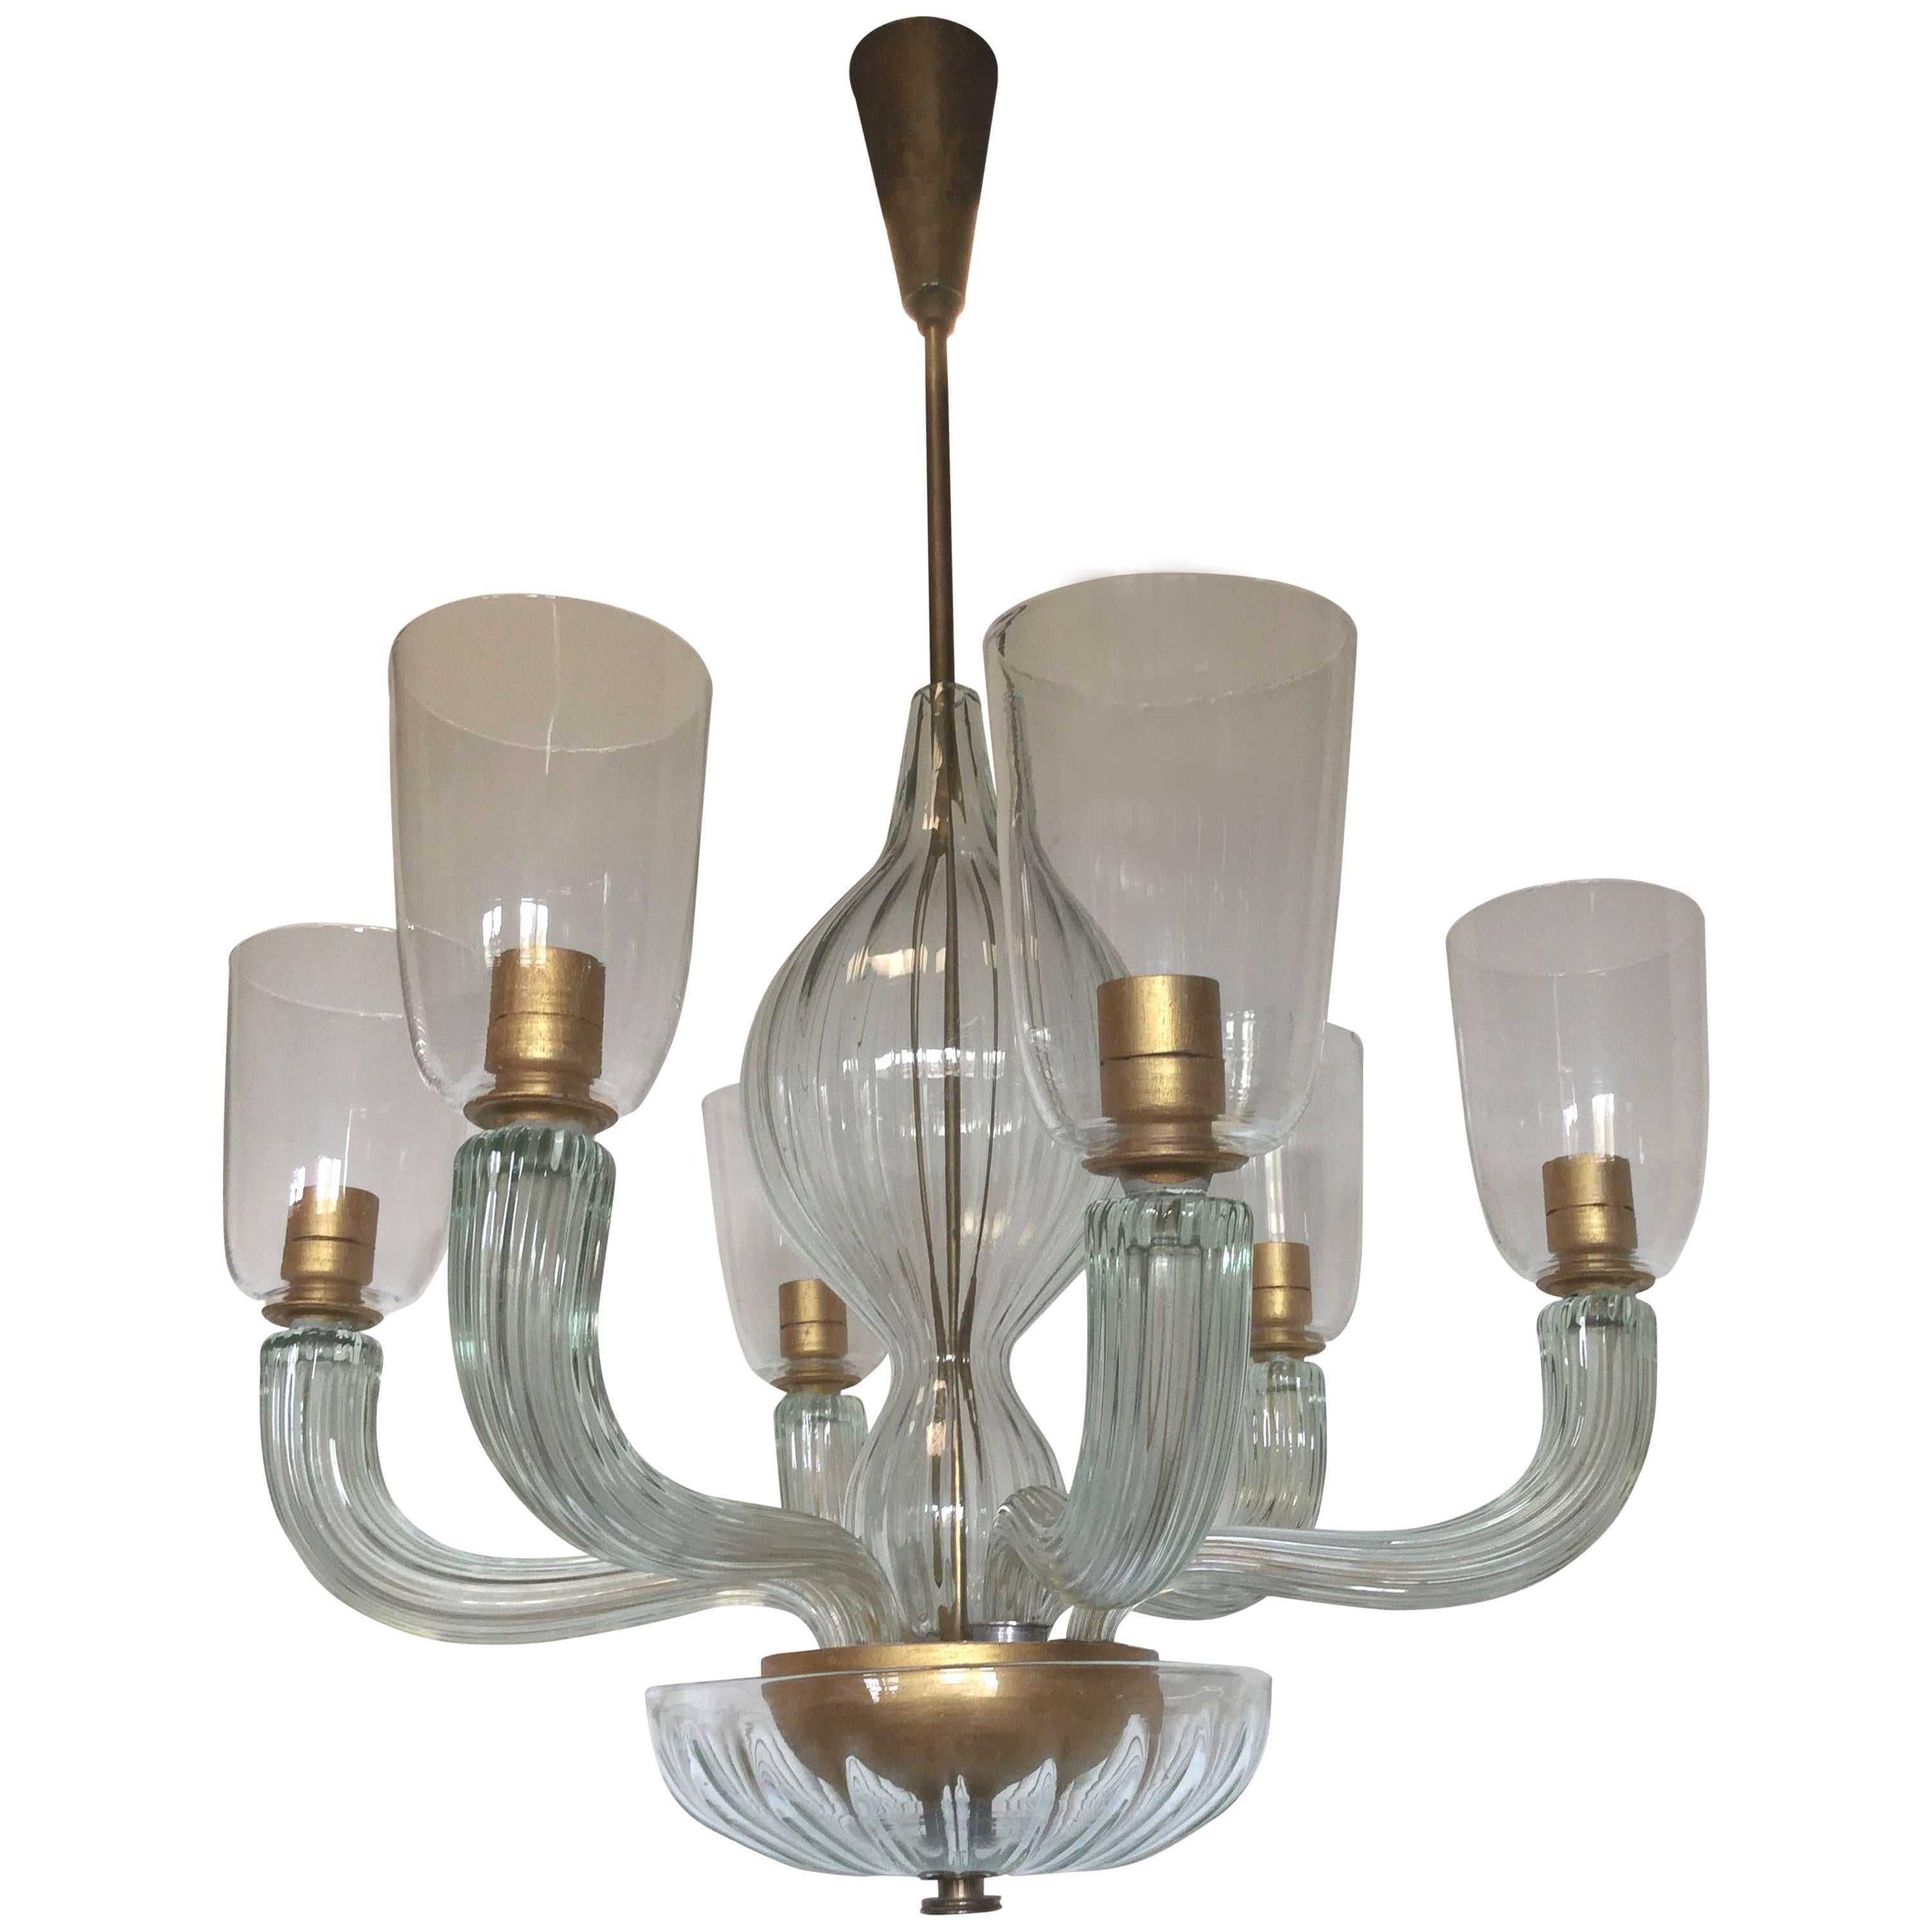 Beautiful Venini Chandelier Attributed to Carlo Scarpa, 1940 For Sale